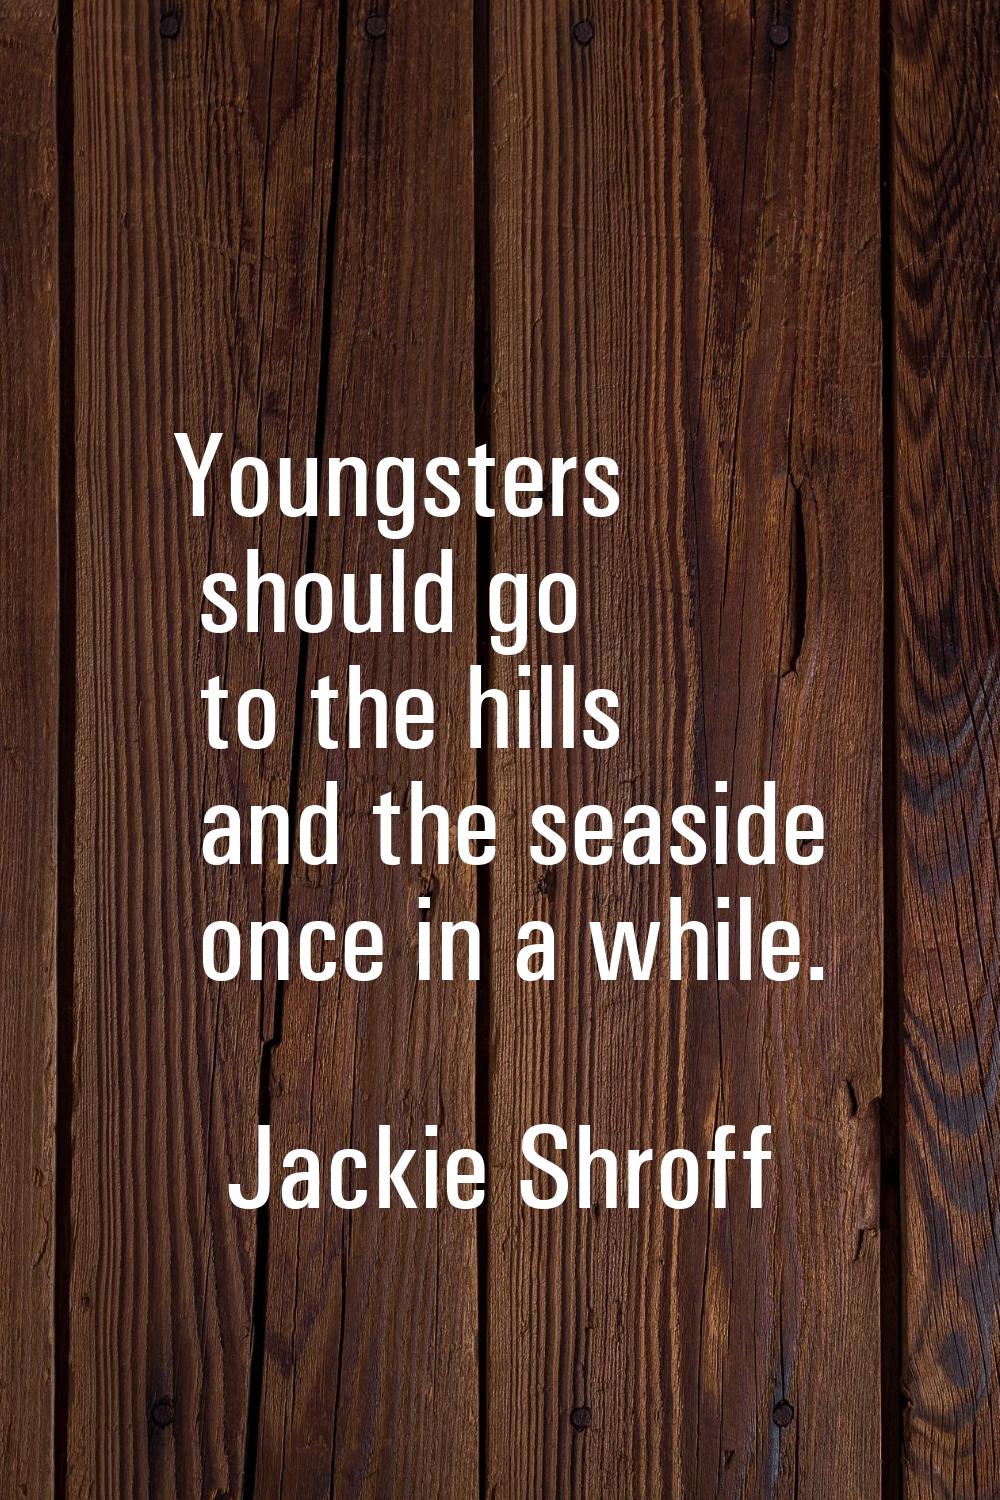 Youngsters should go to the hills and the seaside once in a while.